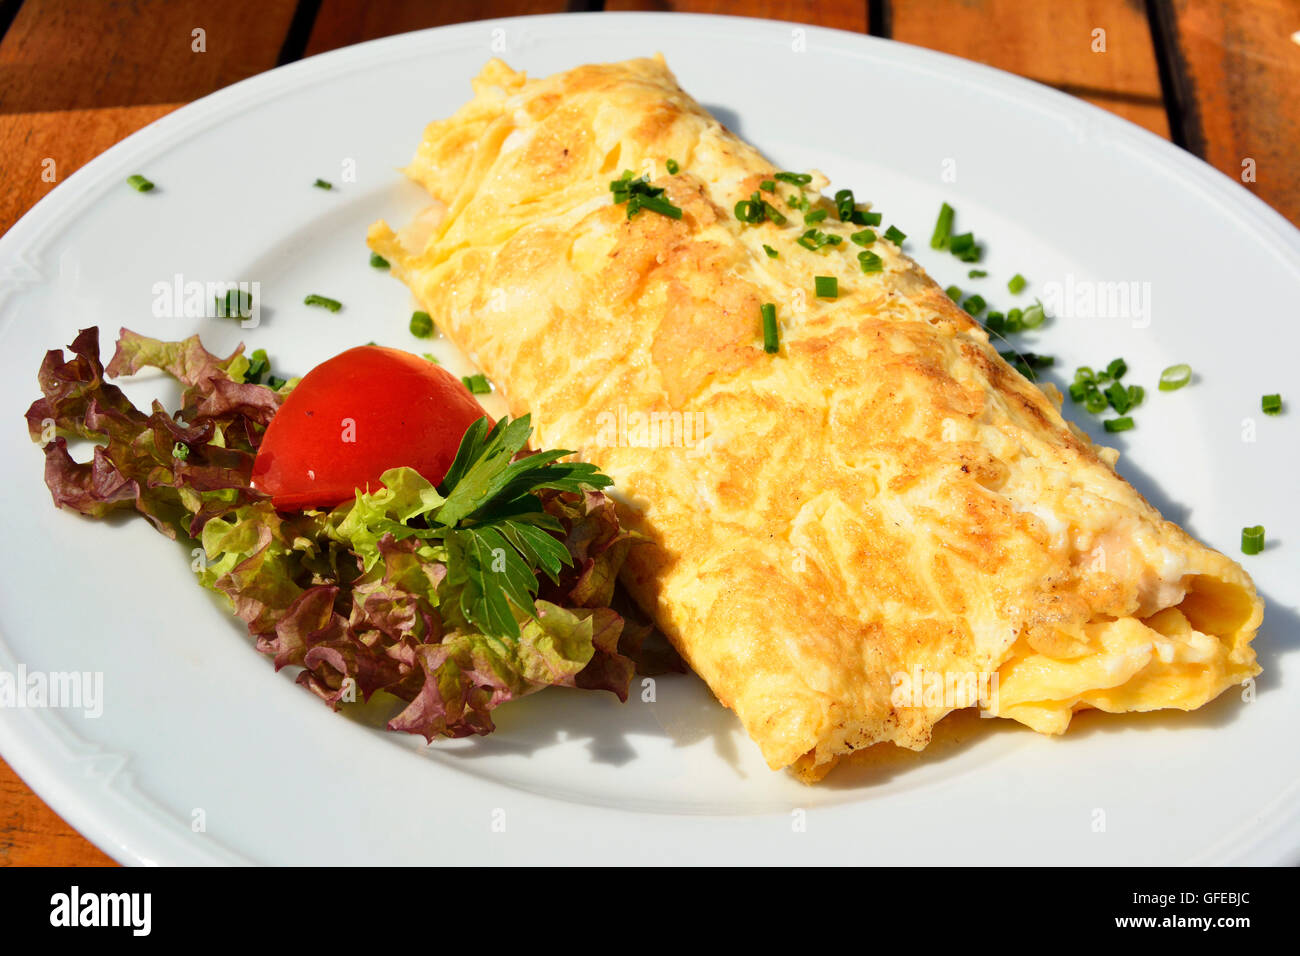 Omelette with salad Stock Photo